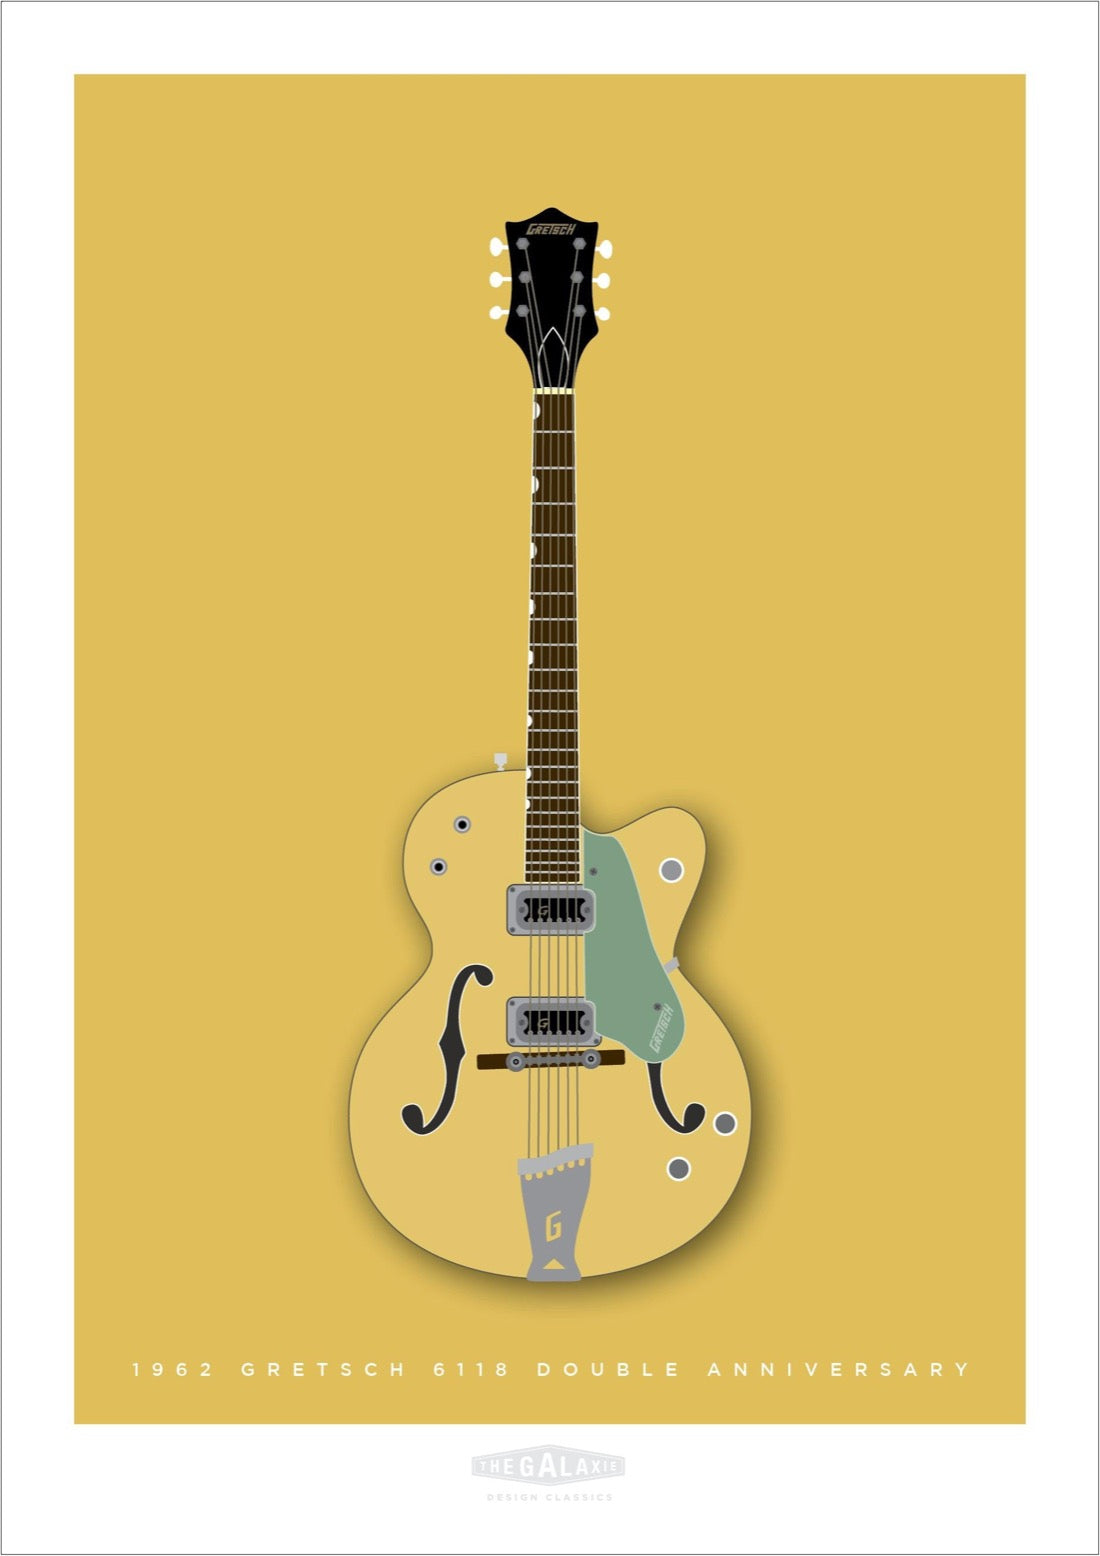 Hand drawn print of a butterscotch 1962 Gretsch 6118 Double Anniversary guitar on a gold background.